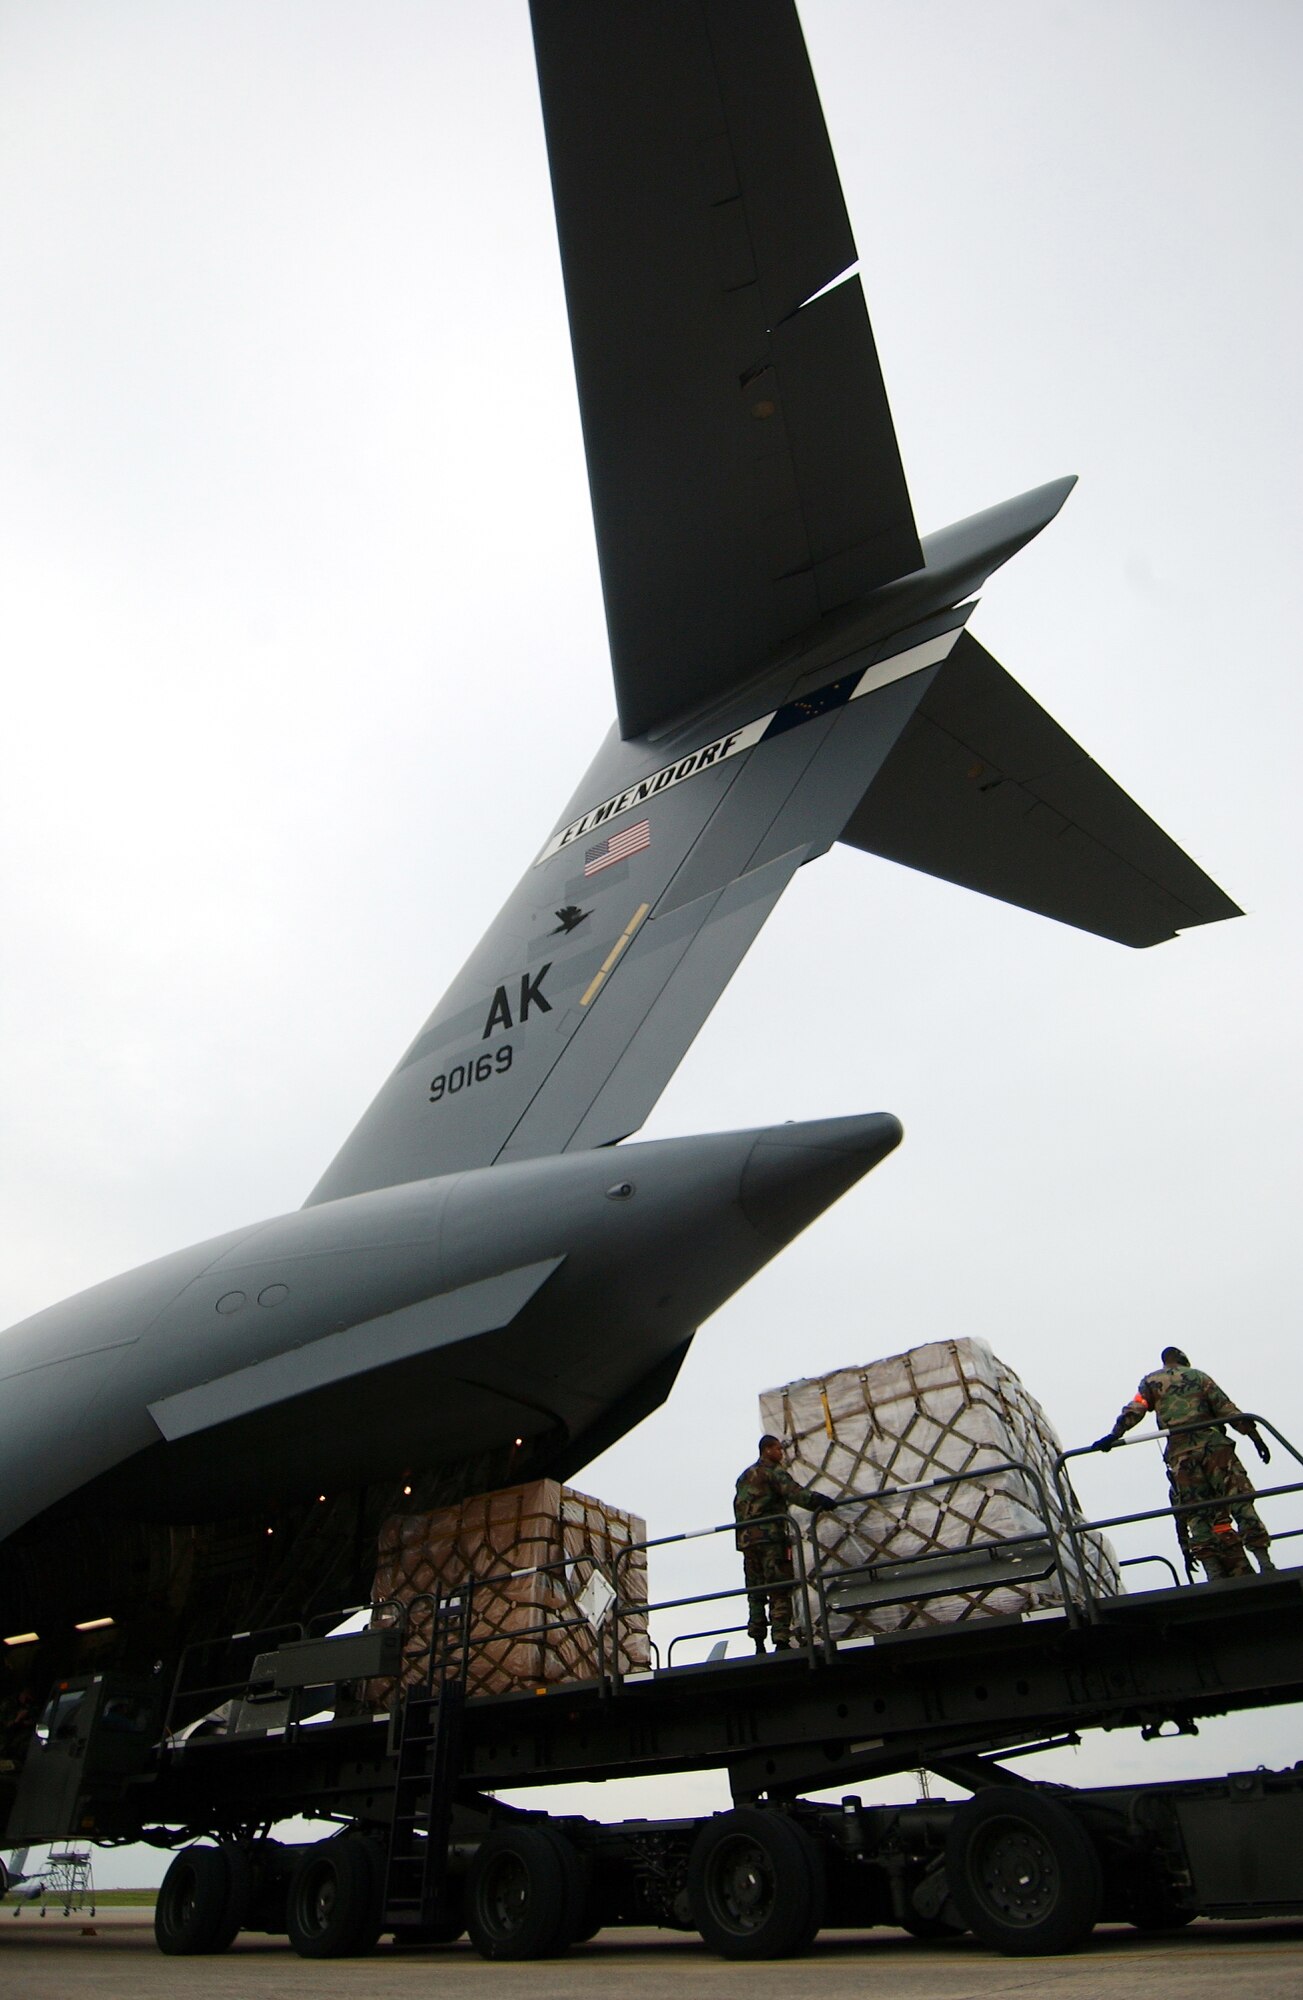 KADENA AIR BASE, Okinawa -- Airmen from the 733rd Air Mobility Squadron load cargo onto a C-17 Globemaster III from Elmendorf Air Force Base, Alaska.  The 733rd AMS loaded medical supplies, food rations and cold weather gear onto this C-17 and another from Hickam Air Force Base, Hawaii, bound for China.  Recently, 19 Chinese provinces experienced the most severe winter storms in 50 years, imposing severe hardships on millions of Chinese citizens.  U.S. Pacific Command coordinated the delivery of the humanitarian supplies to People’s Liberation Army at Shanghai International Airport, China. (U.S. Air Force photo/Tech. Sgt. Rey Ramon)